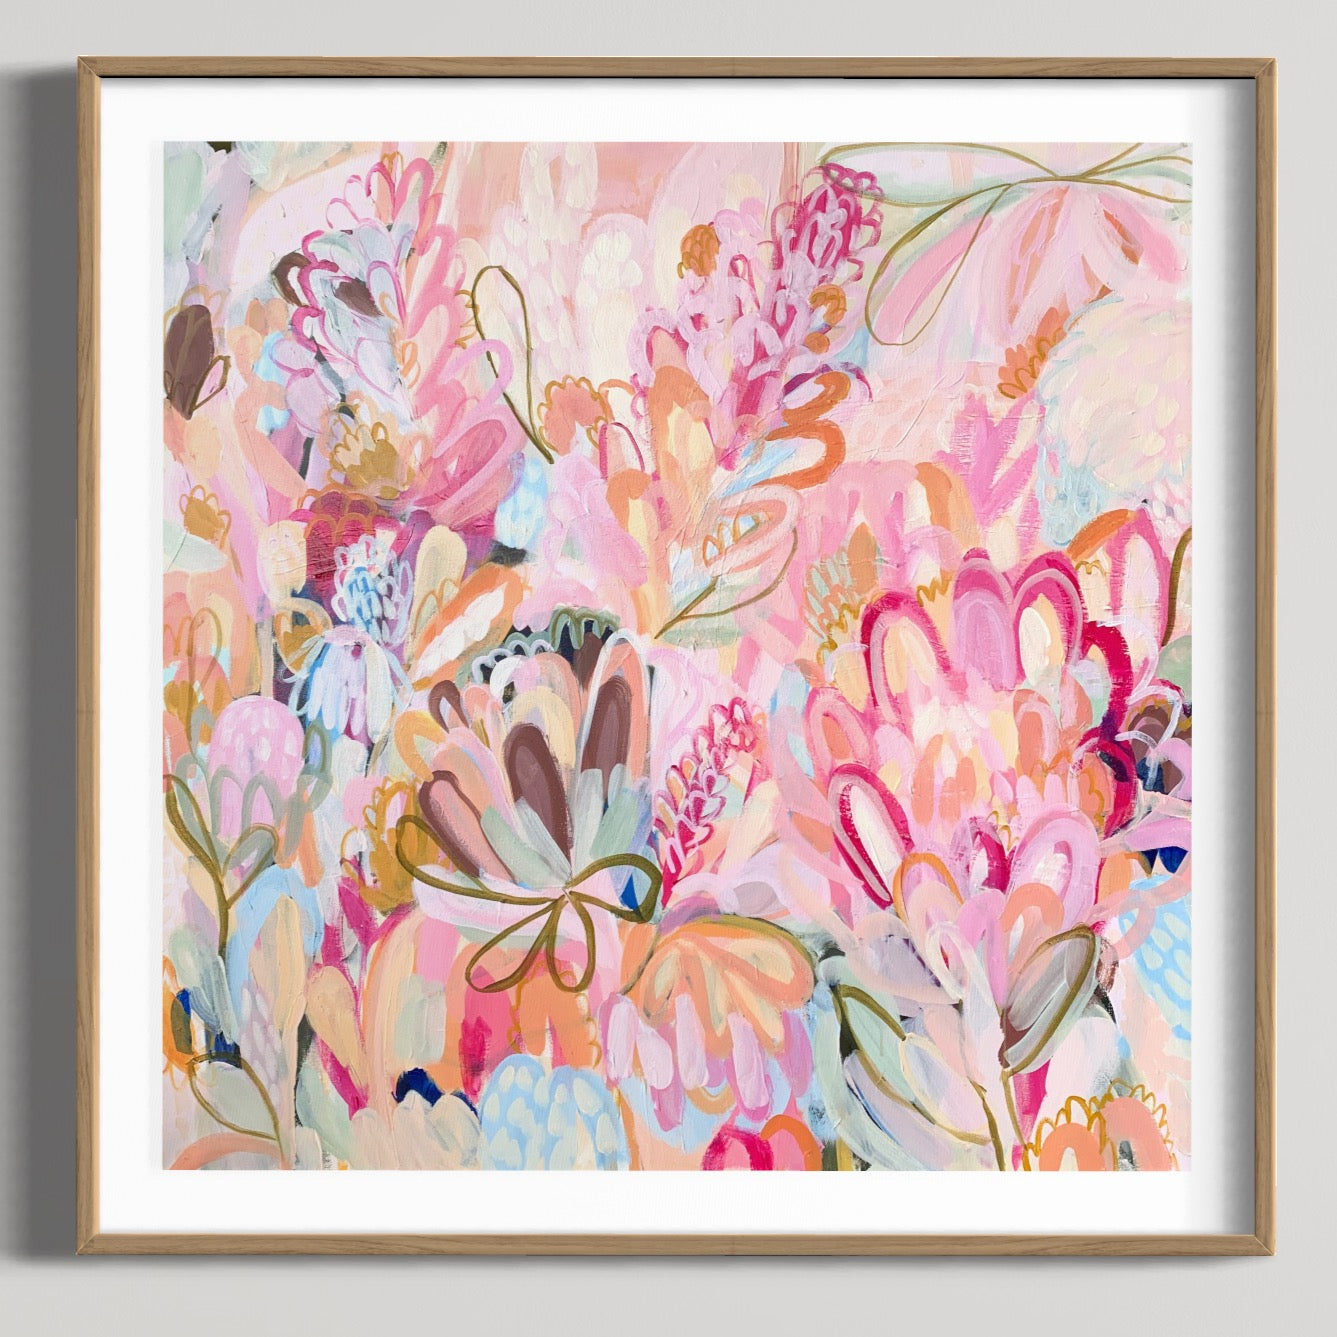 All Of The Flowers - Unframed Print